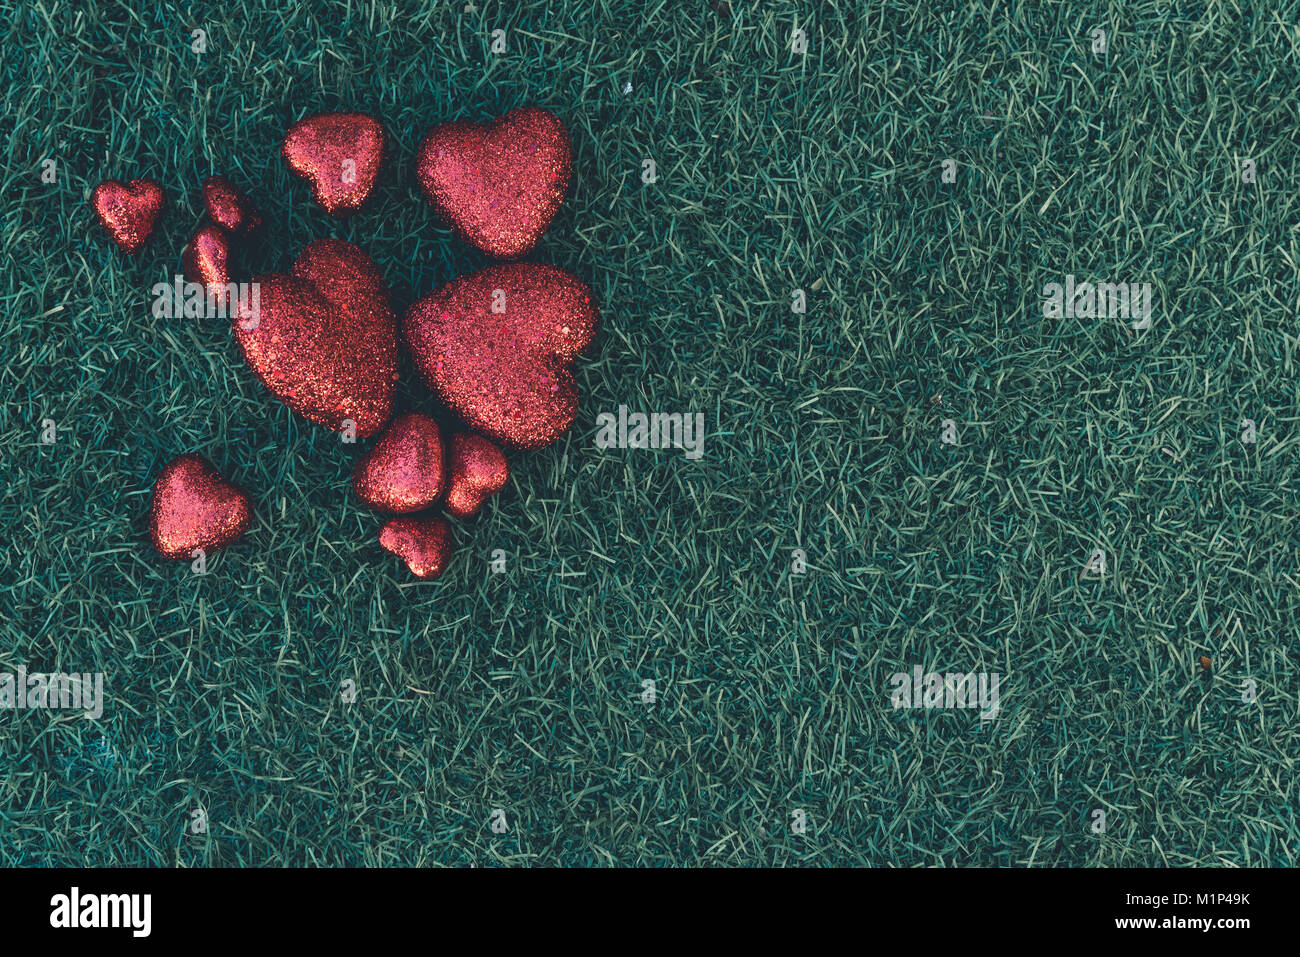 Multiple red hearts bunch up together on top of green grass leaving space on the right for text and messages Stock Photo